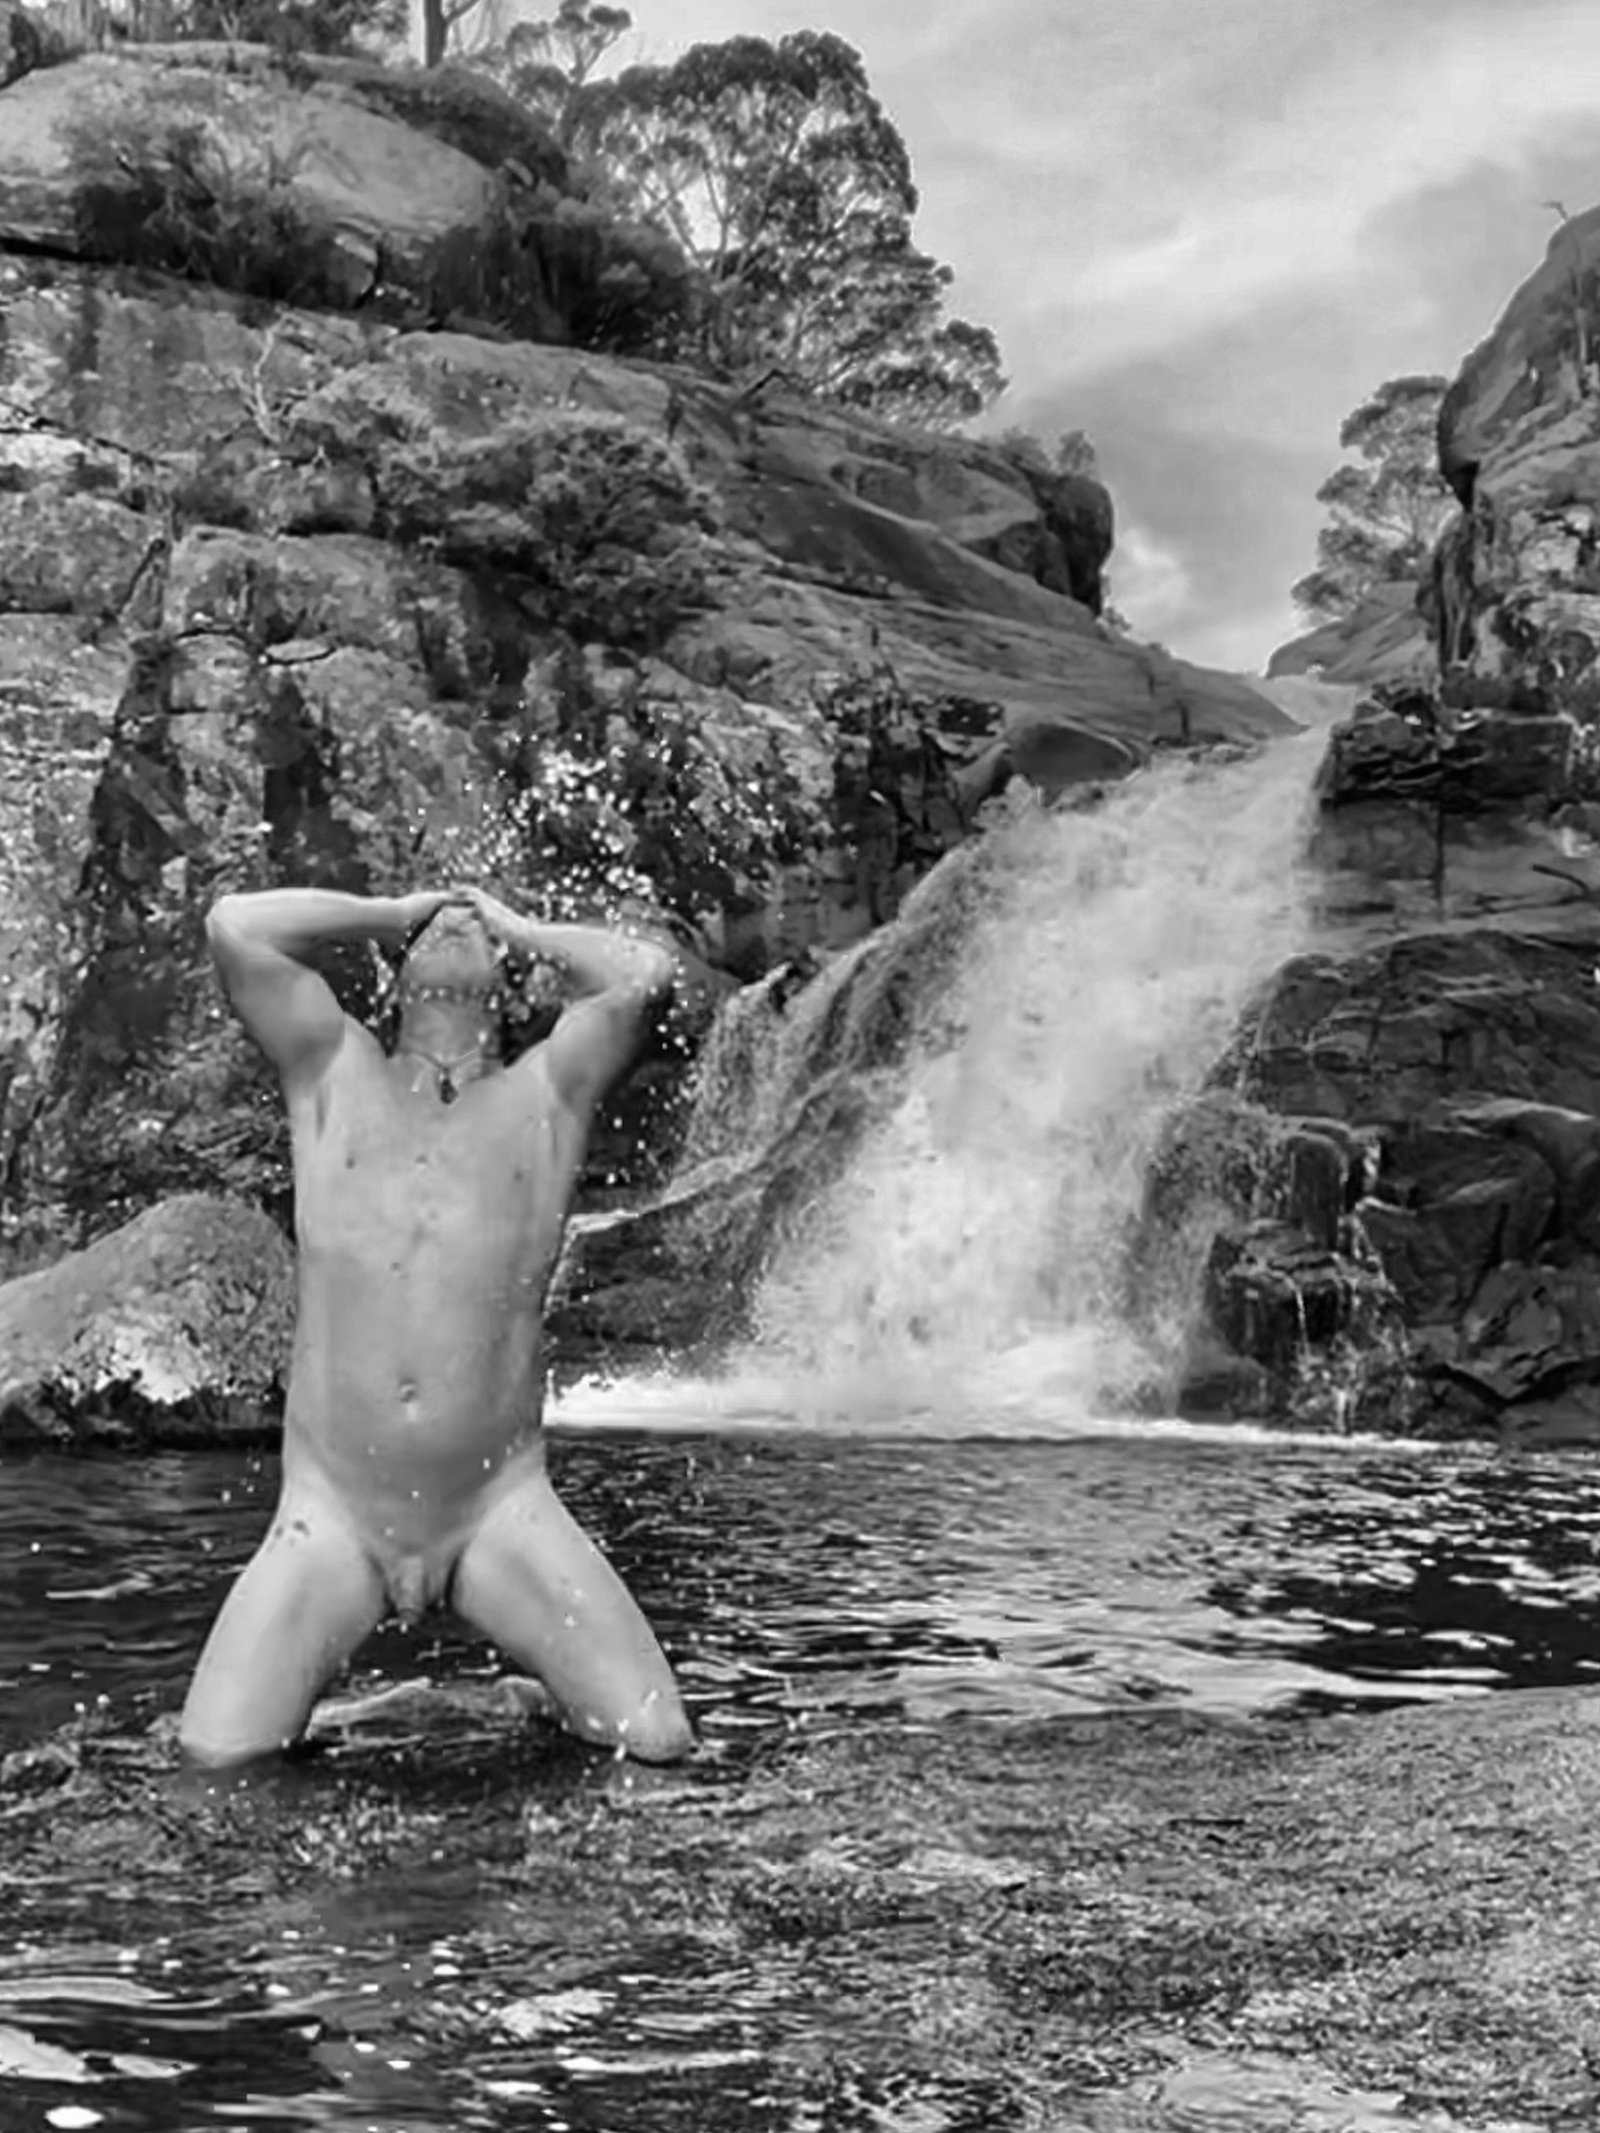 Photo by Nudehiker with the username @Nudehiker, who is a verified user,  December 1, 2022 at 8:30 AM. The post is about the topic Nudist Life and the text says 'Day Two Wild Swim.

Morong Falls, Kanangra Boyd NP, NSW Australia. 

A mtn bike ride to an amazing set of falls'